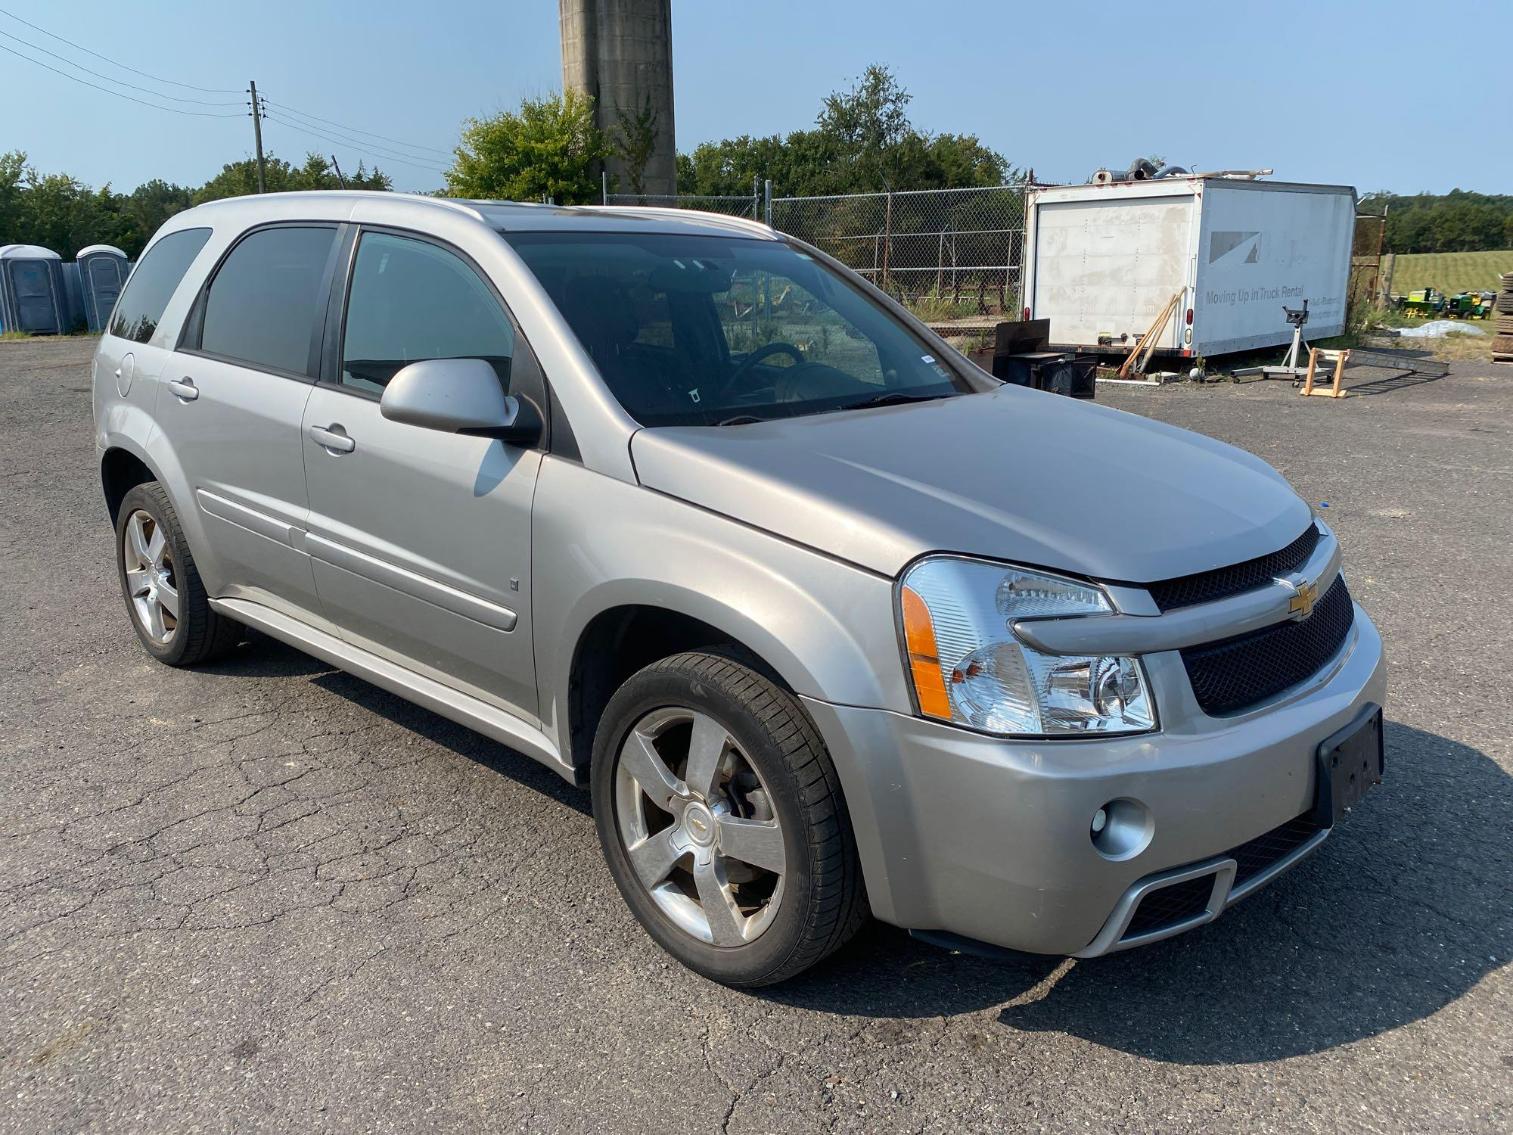 Image for 2008 Chevy Equinox, Per Seller Runs and Drives VIN #: 2CNDL537486035850 Mileage:  140,841